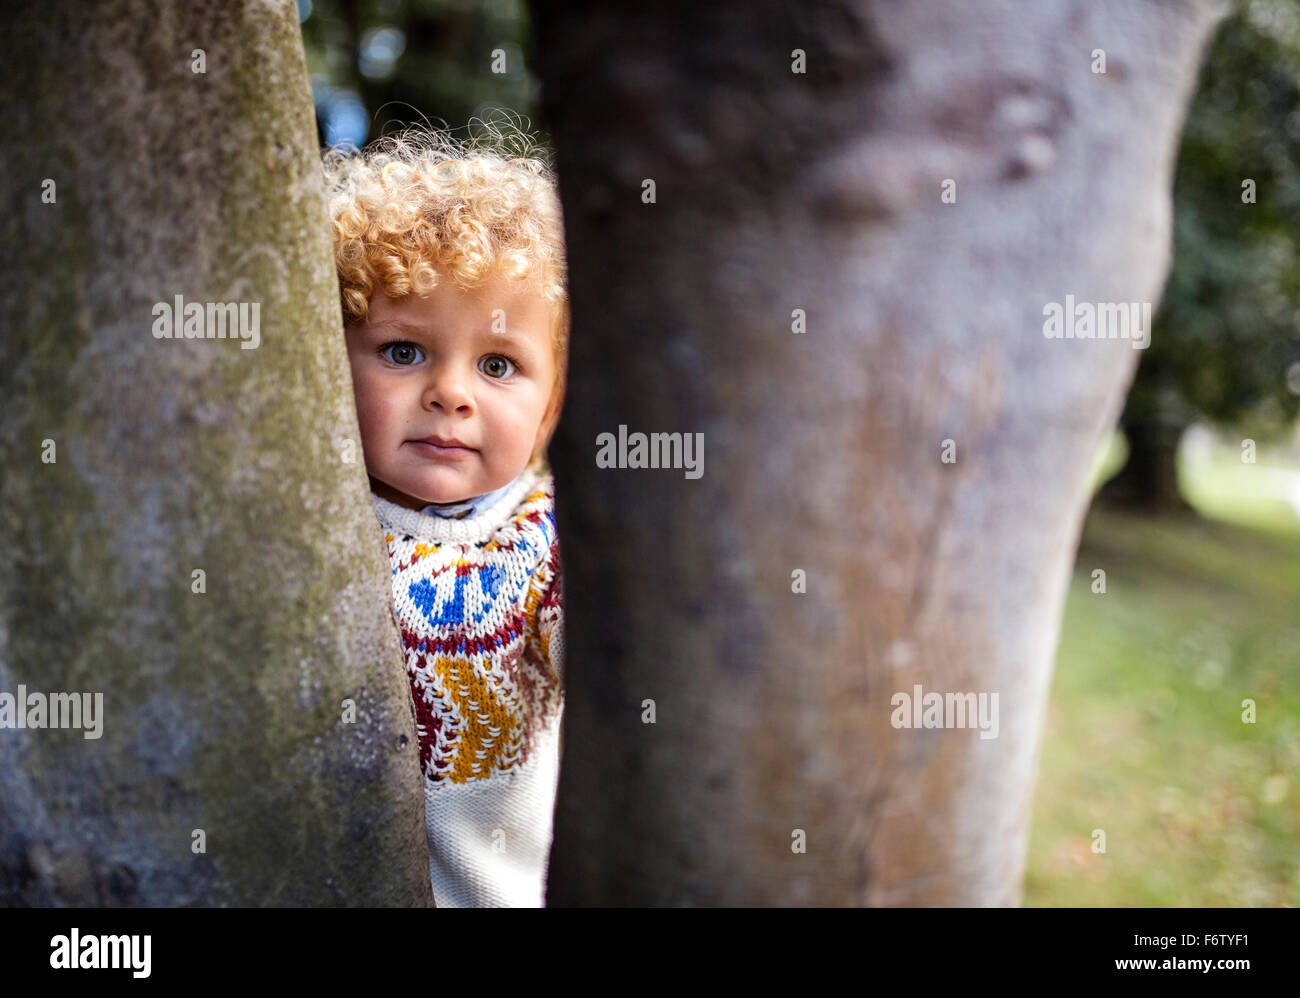 Portrait of blond little boy wearing patterned knit pullover looking between two tree trunks Stock Photo